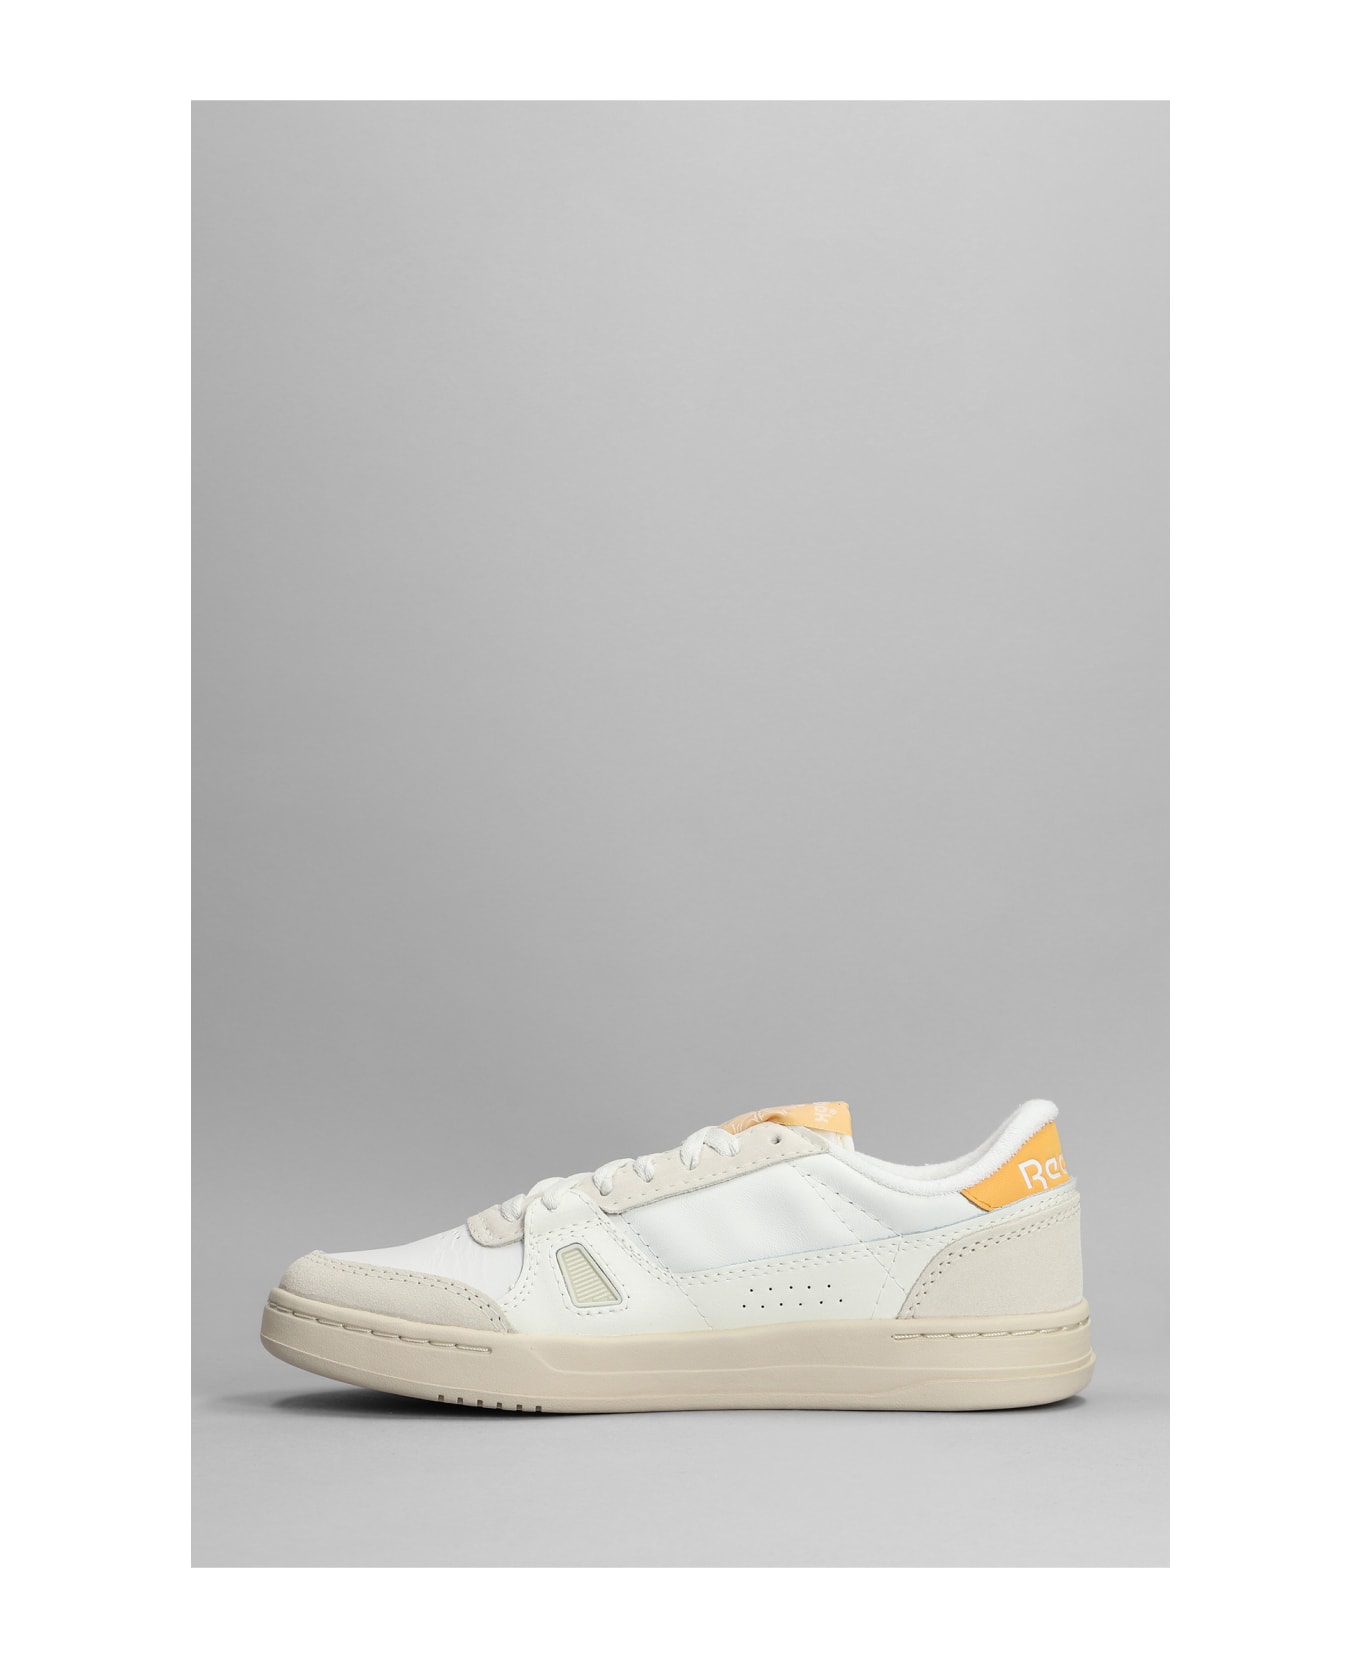 Reebok Lt Court Sneakers In White Leather - Multicolour